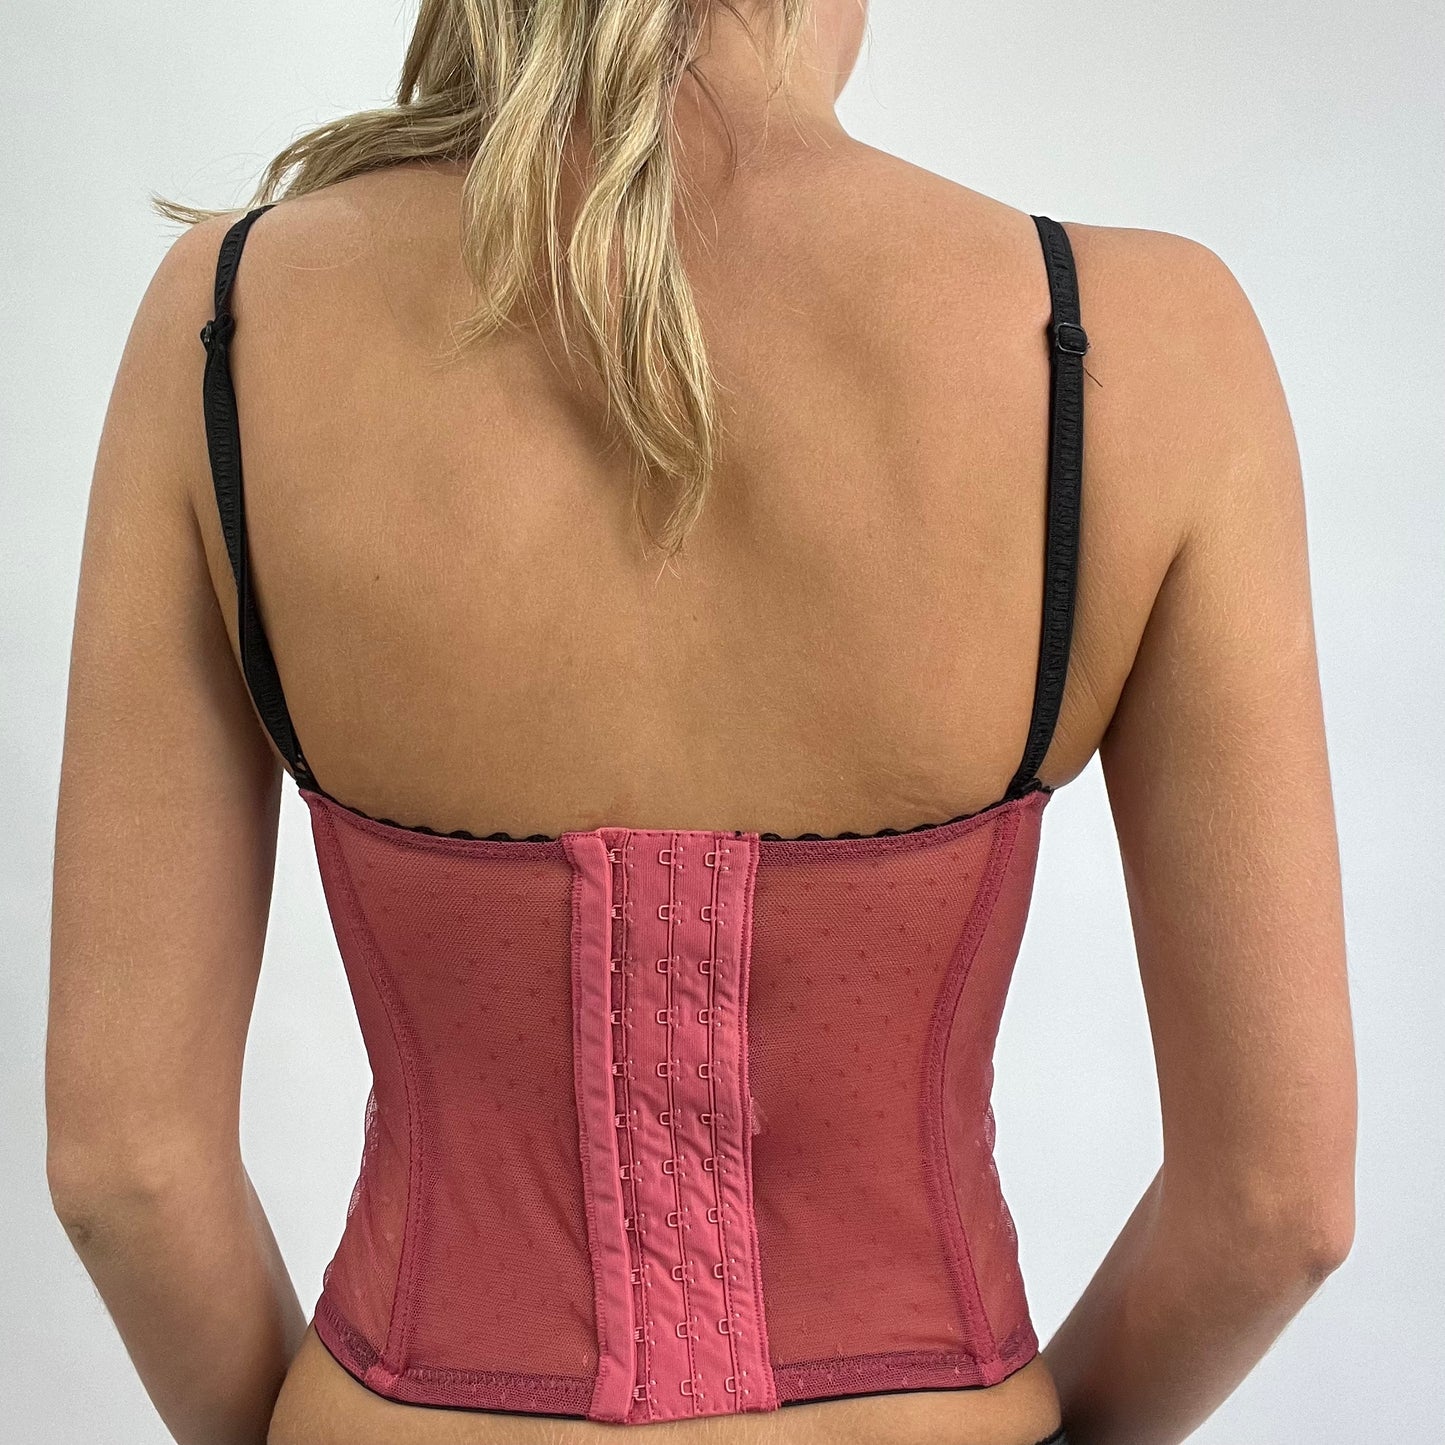 ETHEREAL GIRL DROP | small pink lace corset with black embroidery